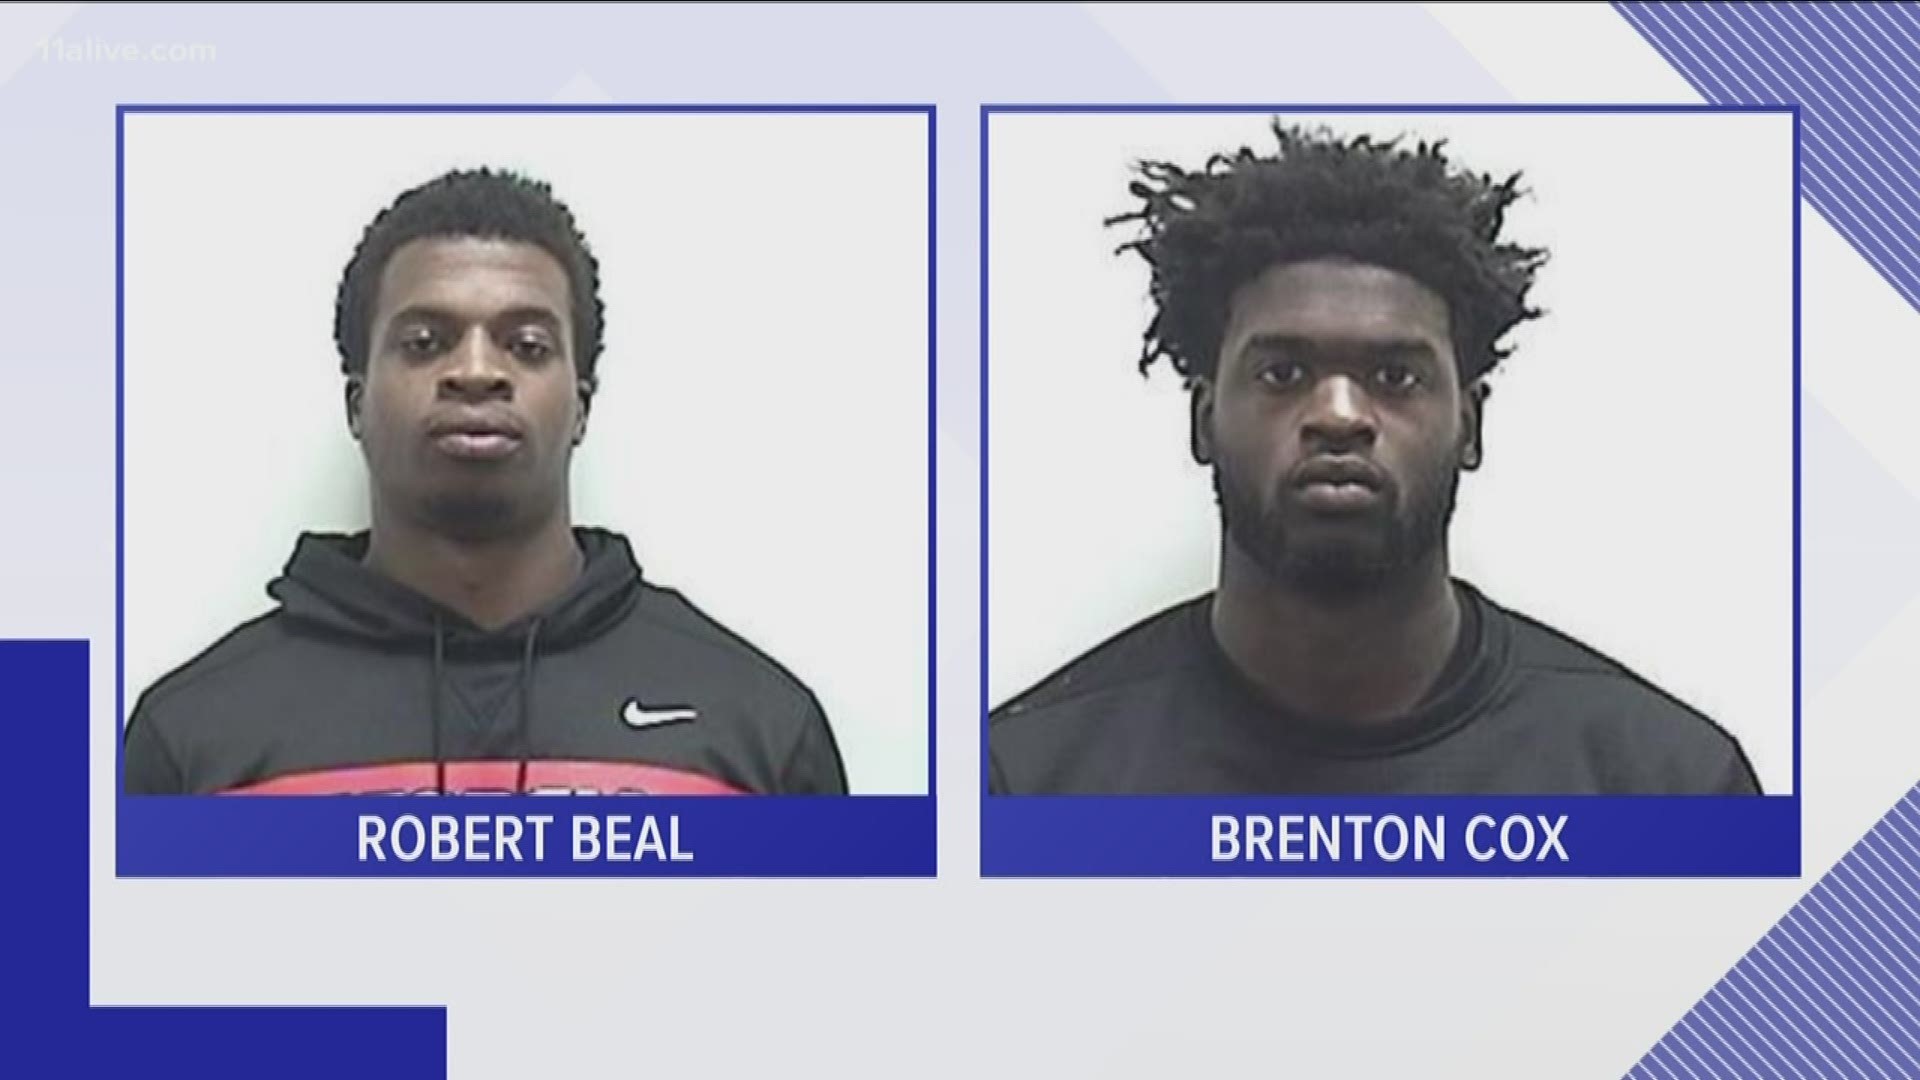 Six UGA players have now been arrested for misconduct in the program's off-season.